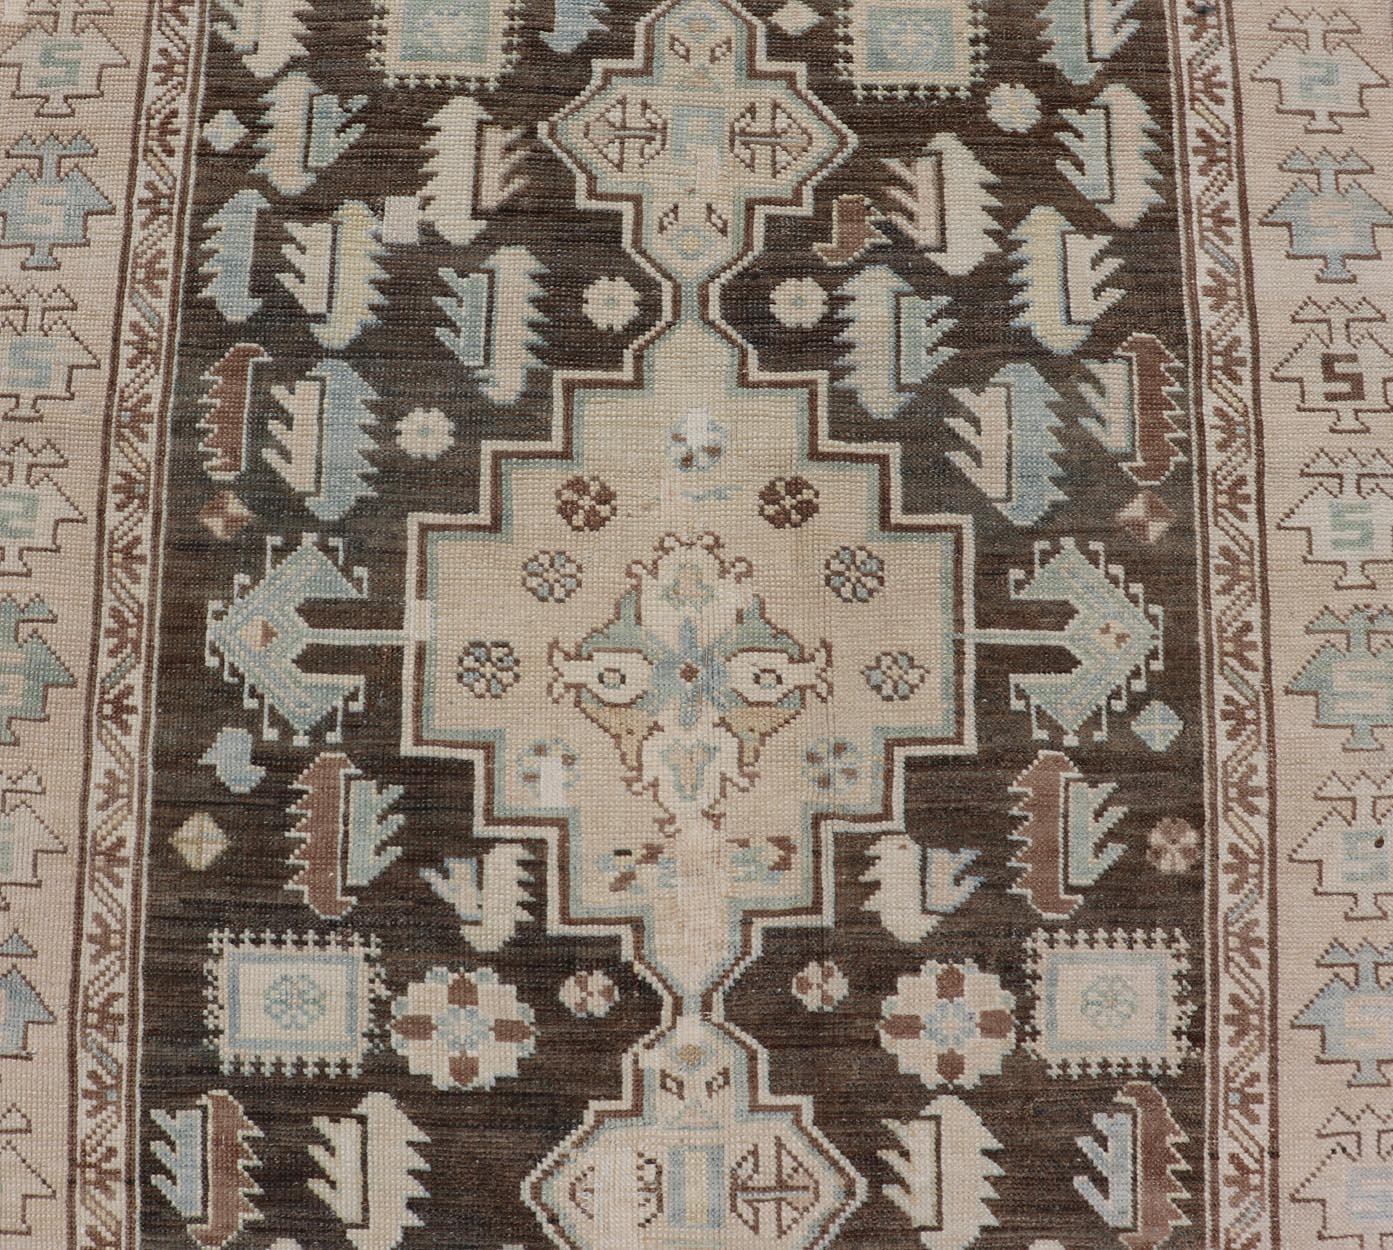 Wool Antique Kazak Runner with Geometric Design and Medallions on a Brown Field